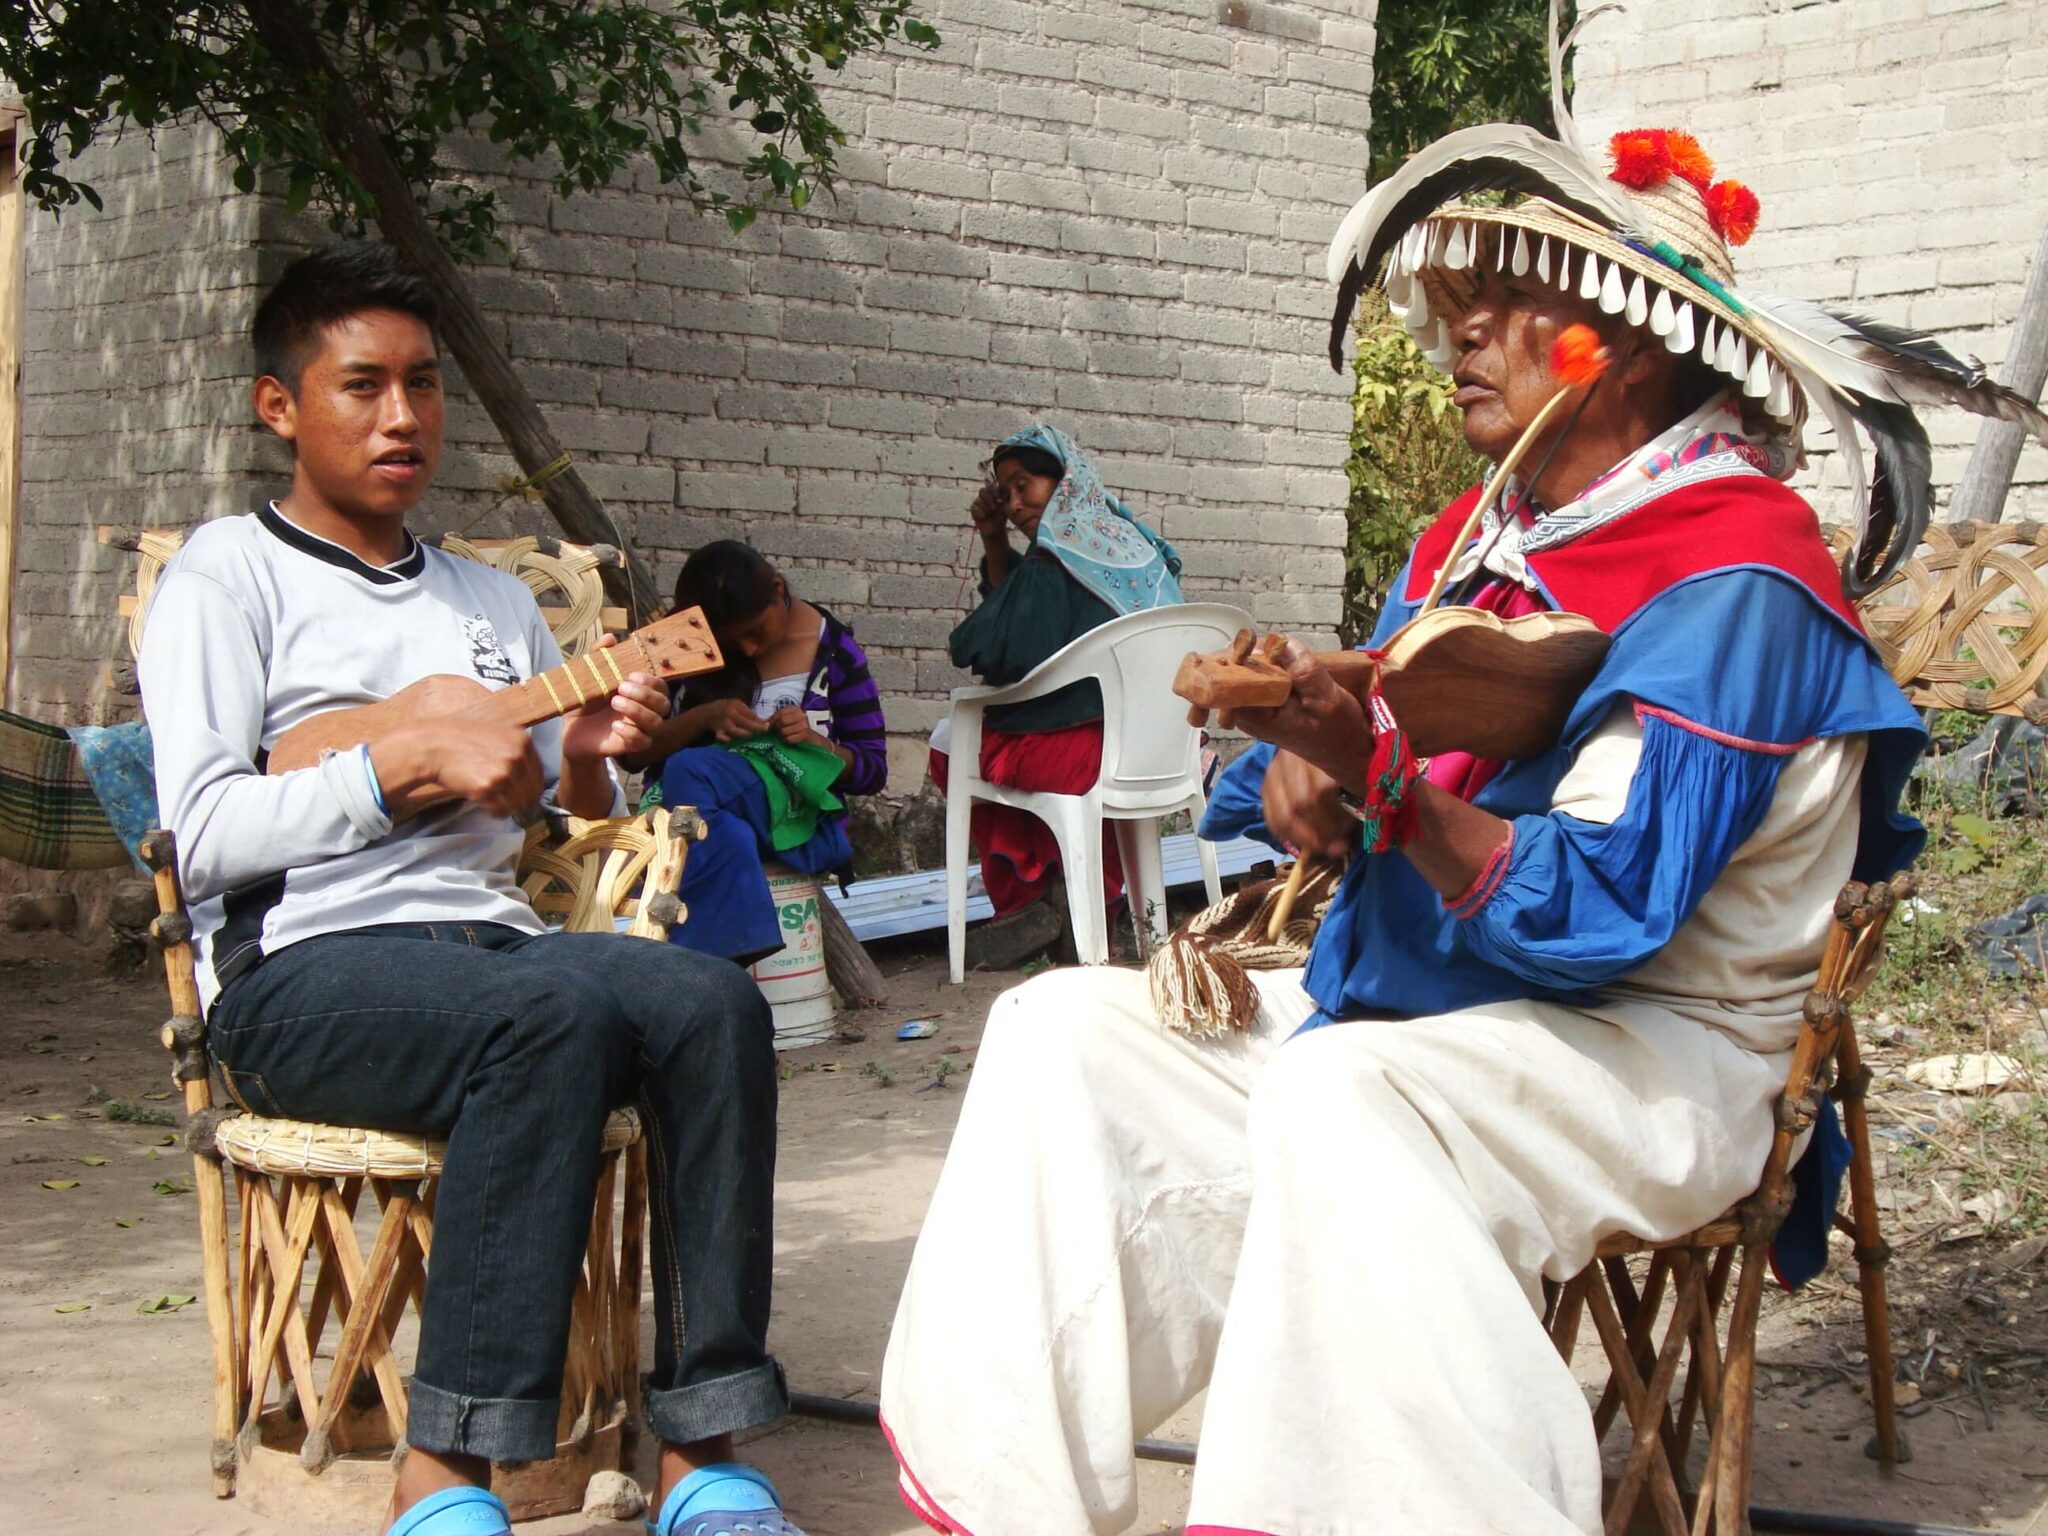 A teenage Huichol boy sits on a chair playing a small stringer instruments. An older Huichol man sits on a chair playing a small stringer instrument.